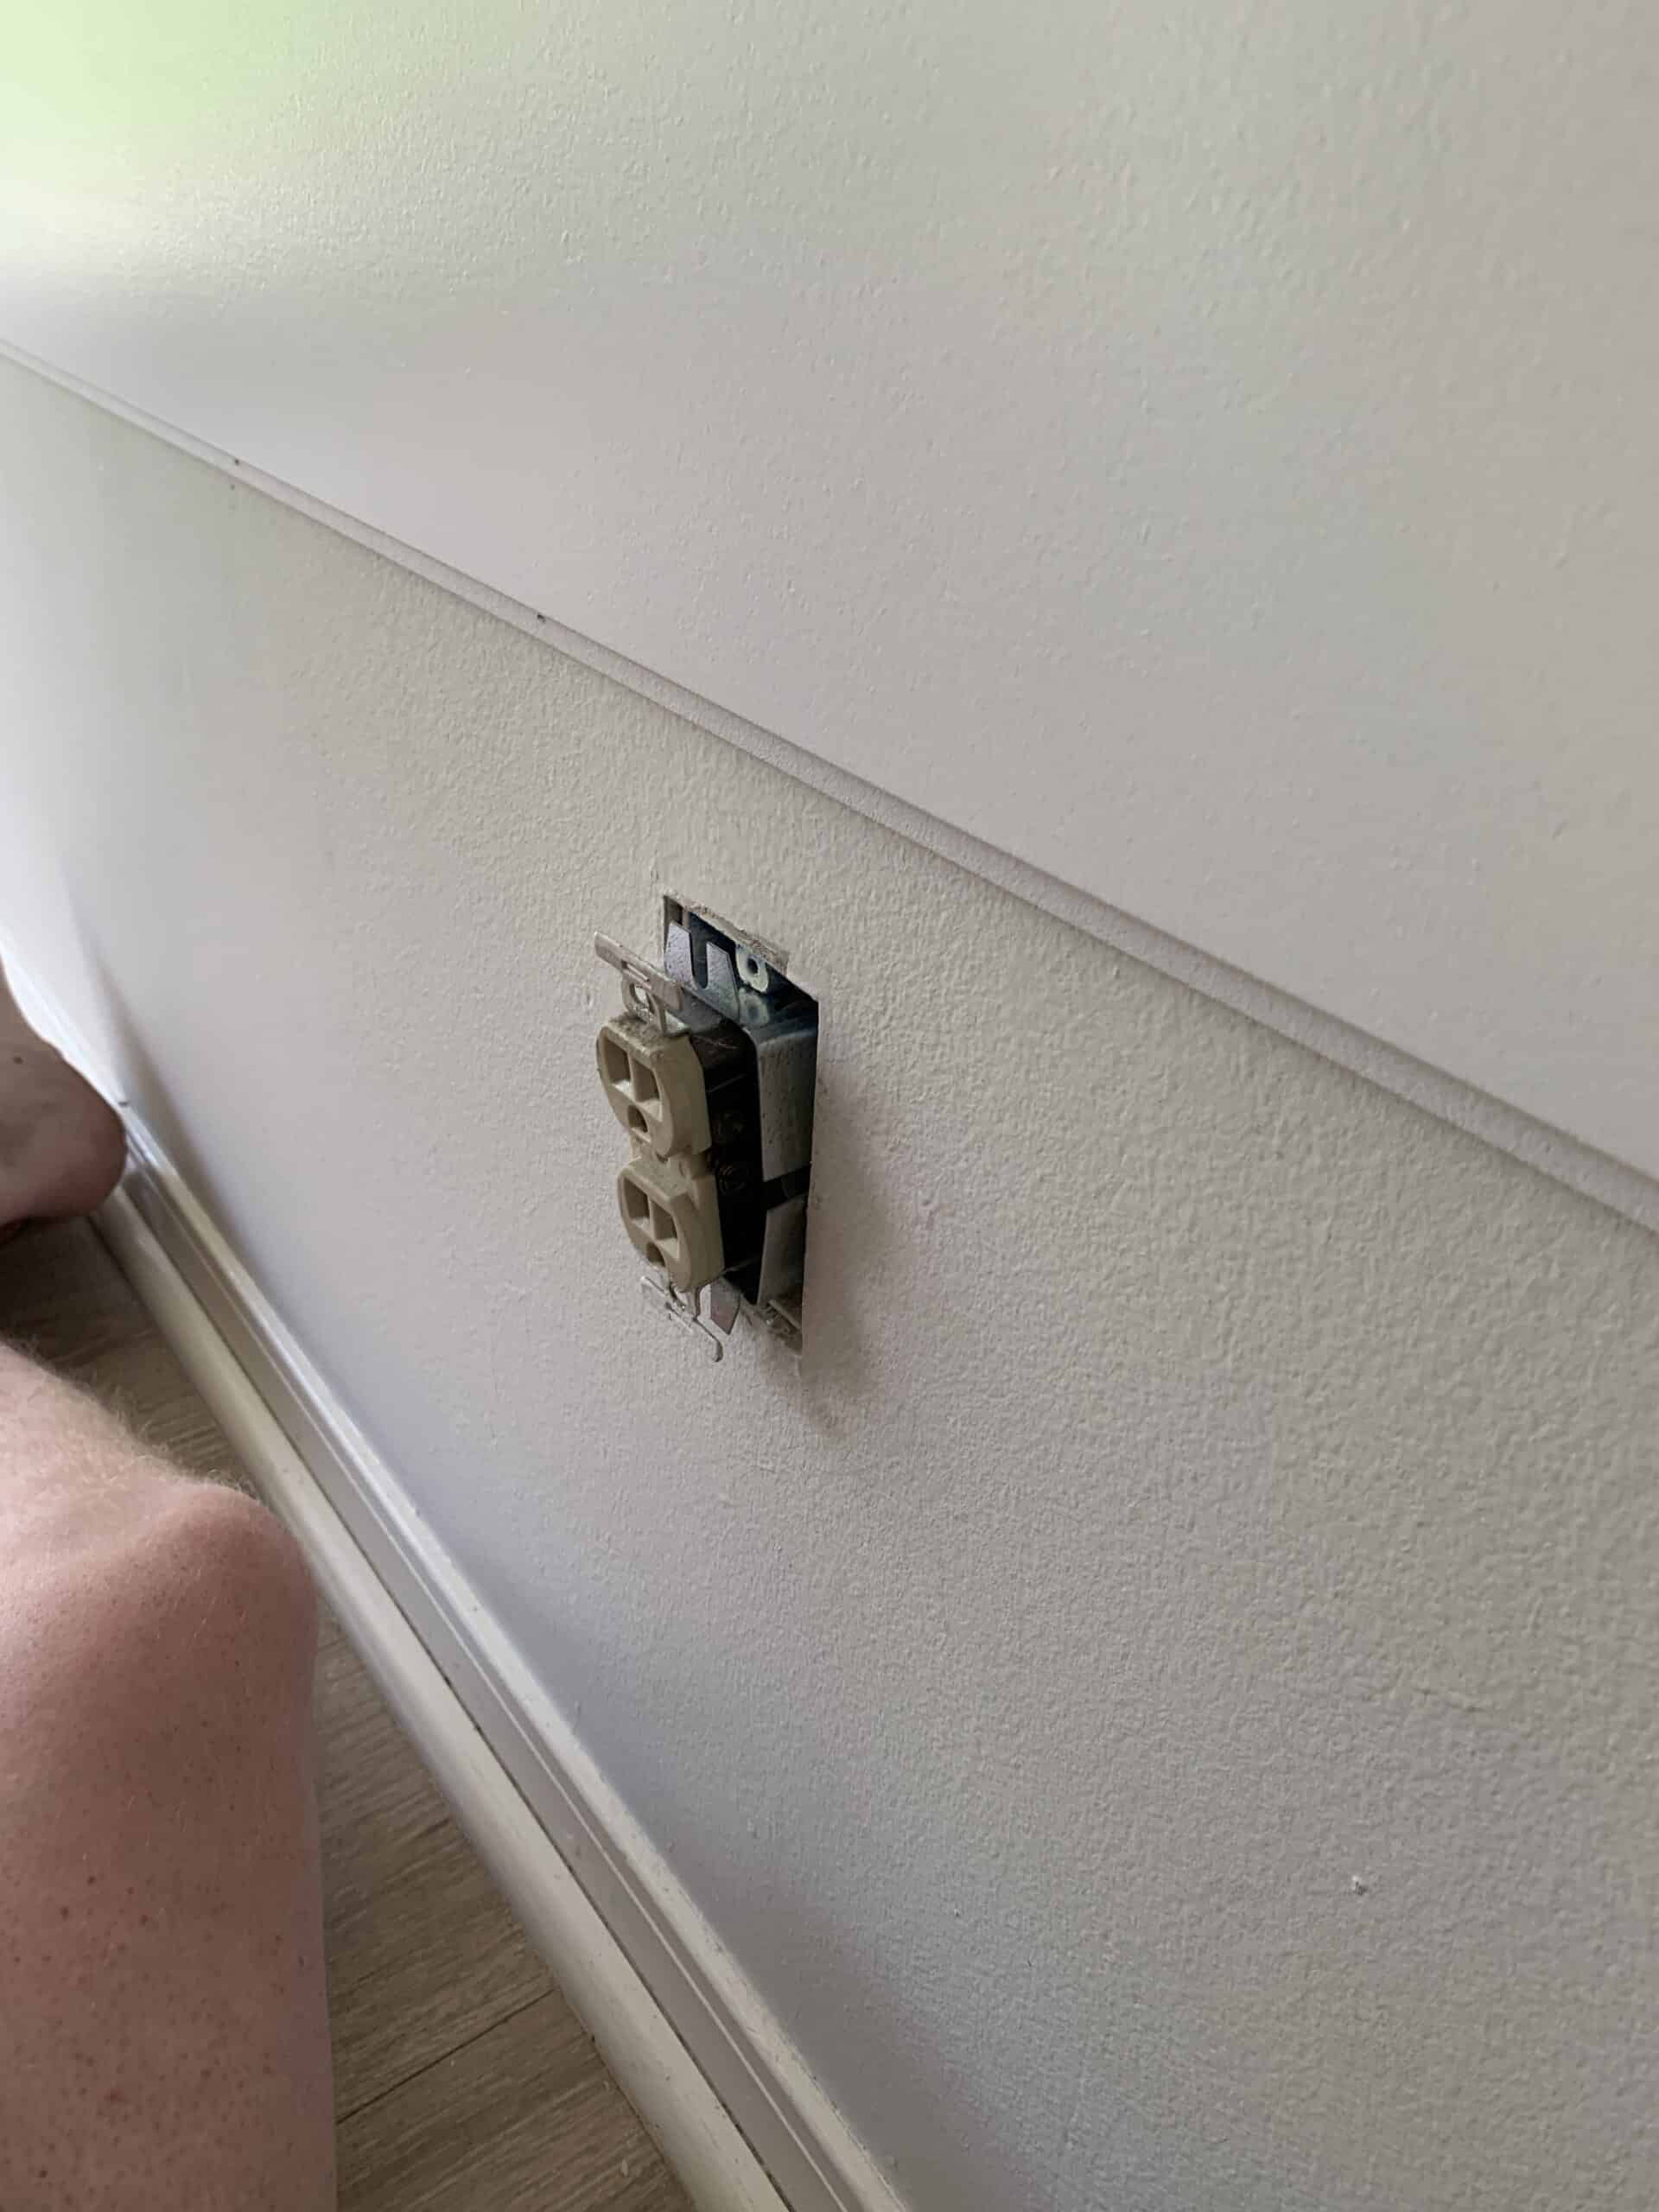 adding an outlet extender to a wall